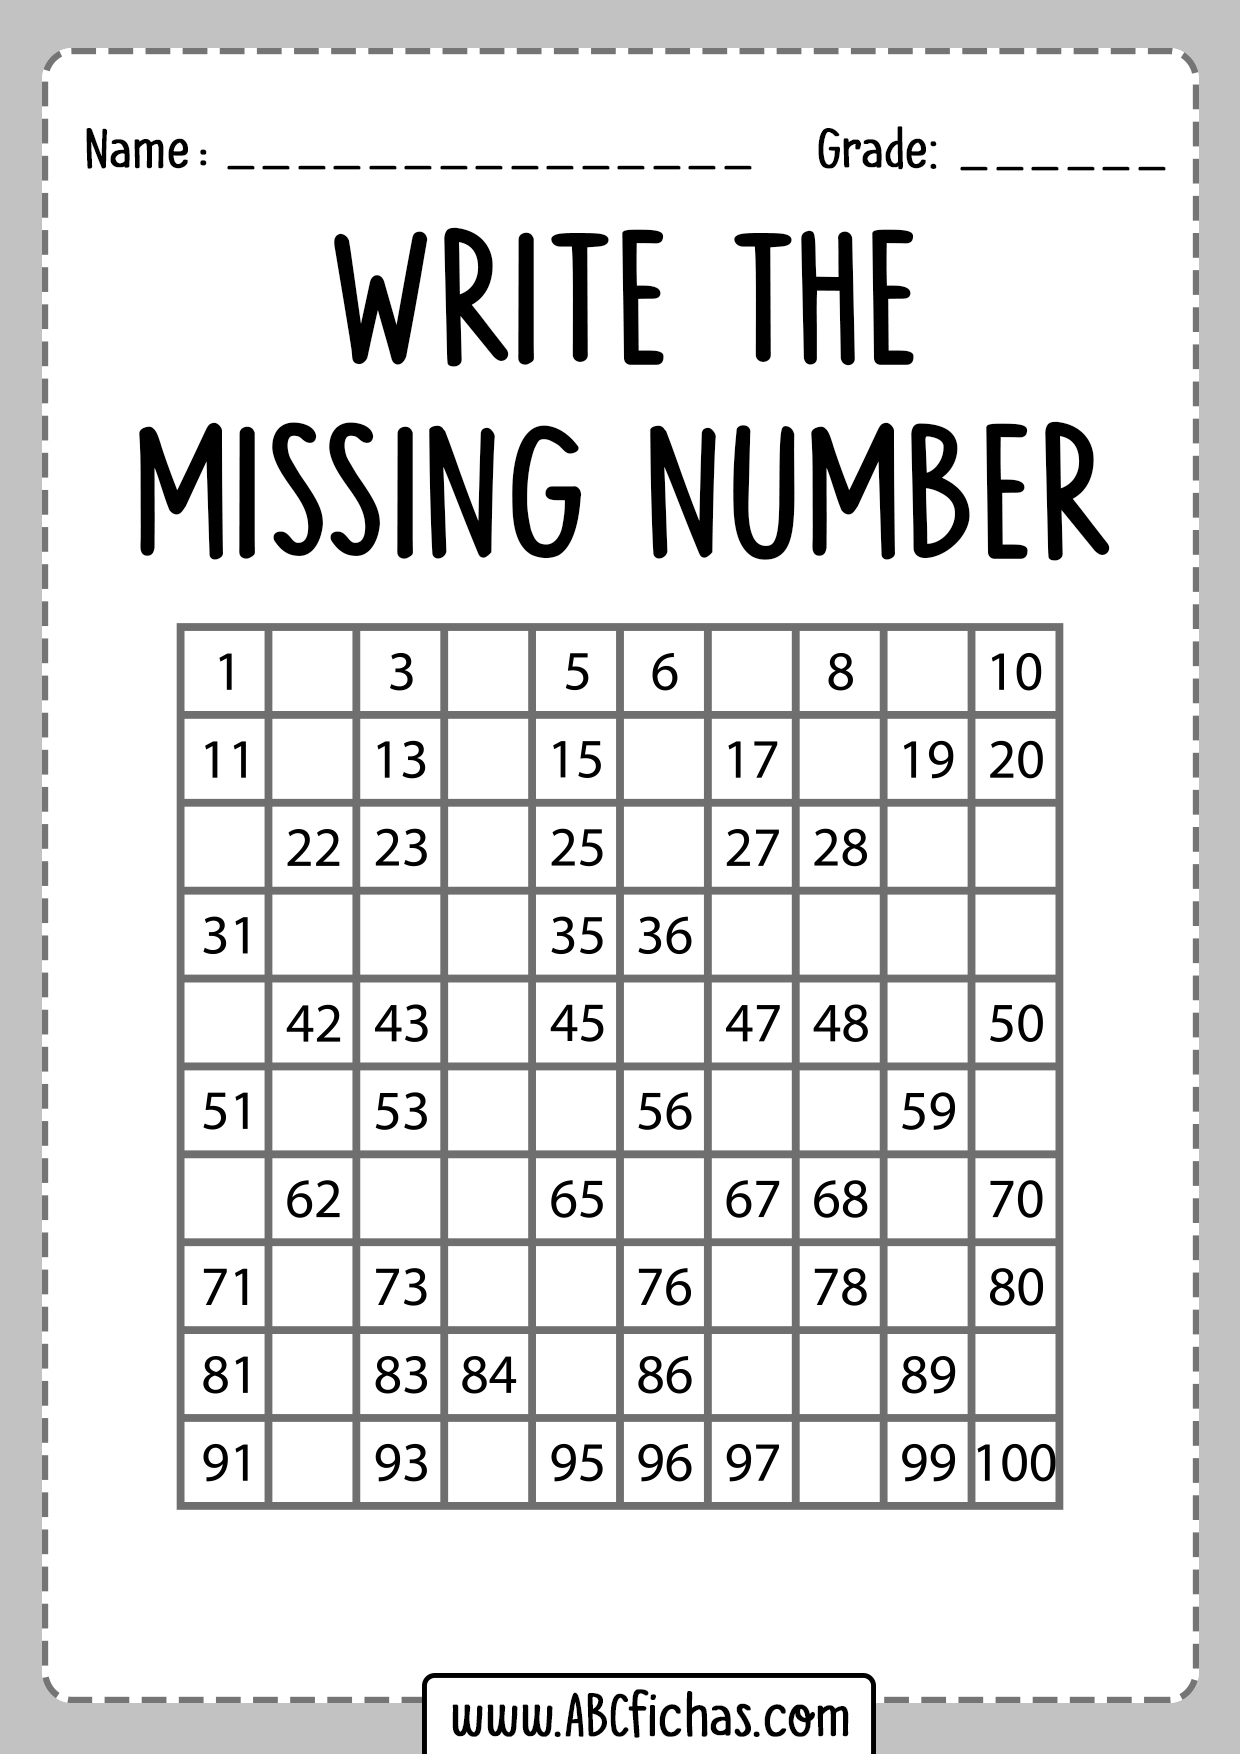 Write The Missing Number Printable Worksheet ABC Fichas